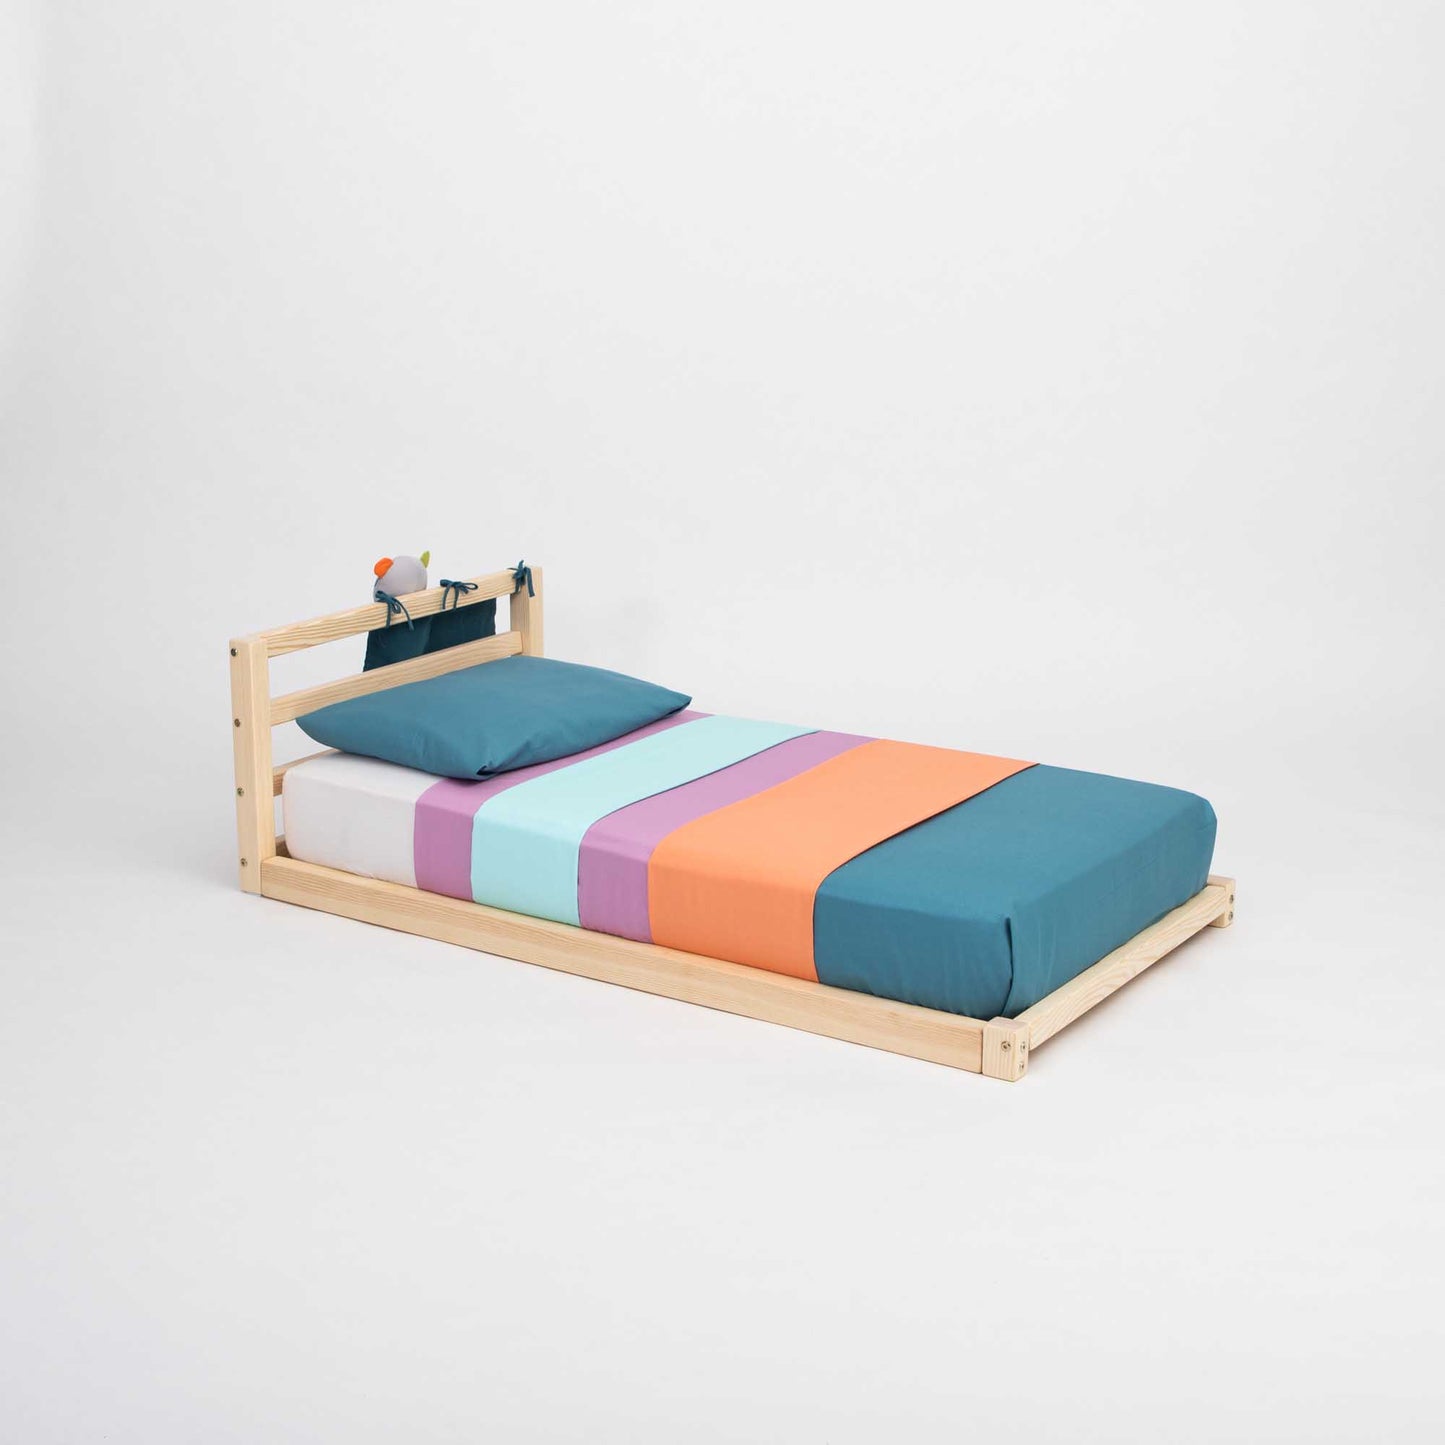 2-in-1 transformable kids' bed with a horizontal rail headboard